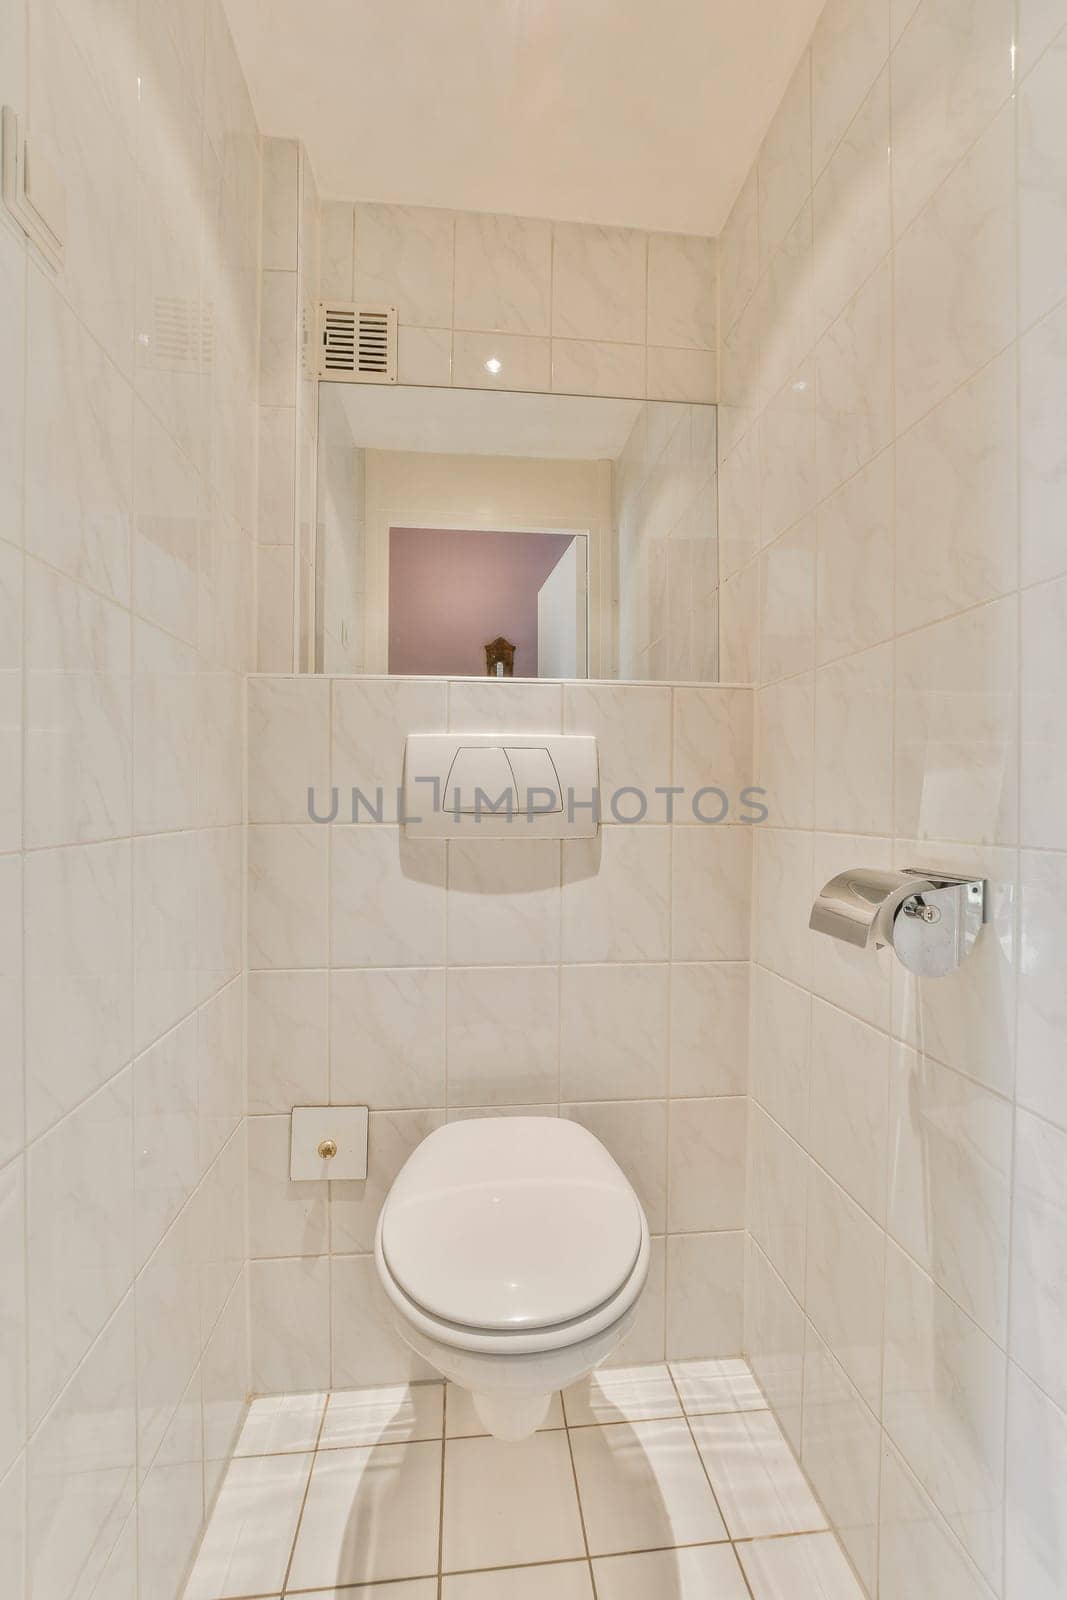 a white toilet in a bathroom with tile flooring and wall mounted mirror above the toilet is an image of a woman's reflection